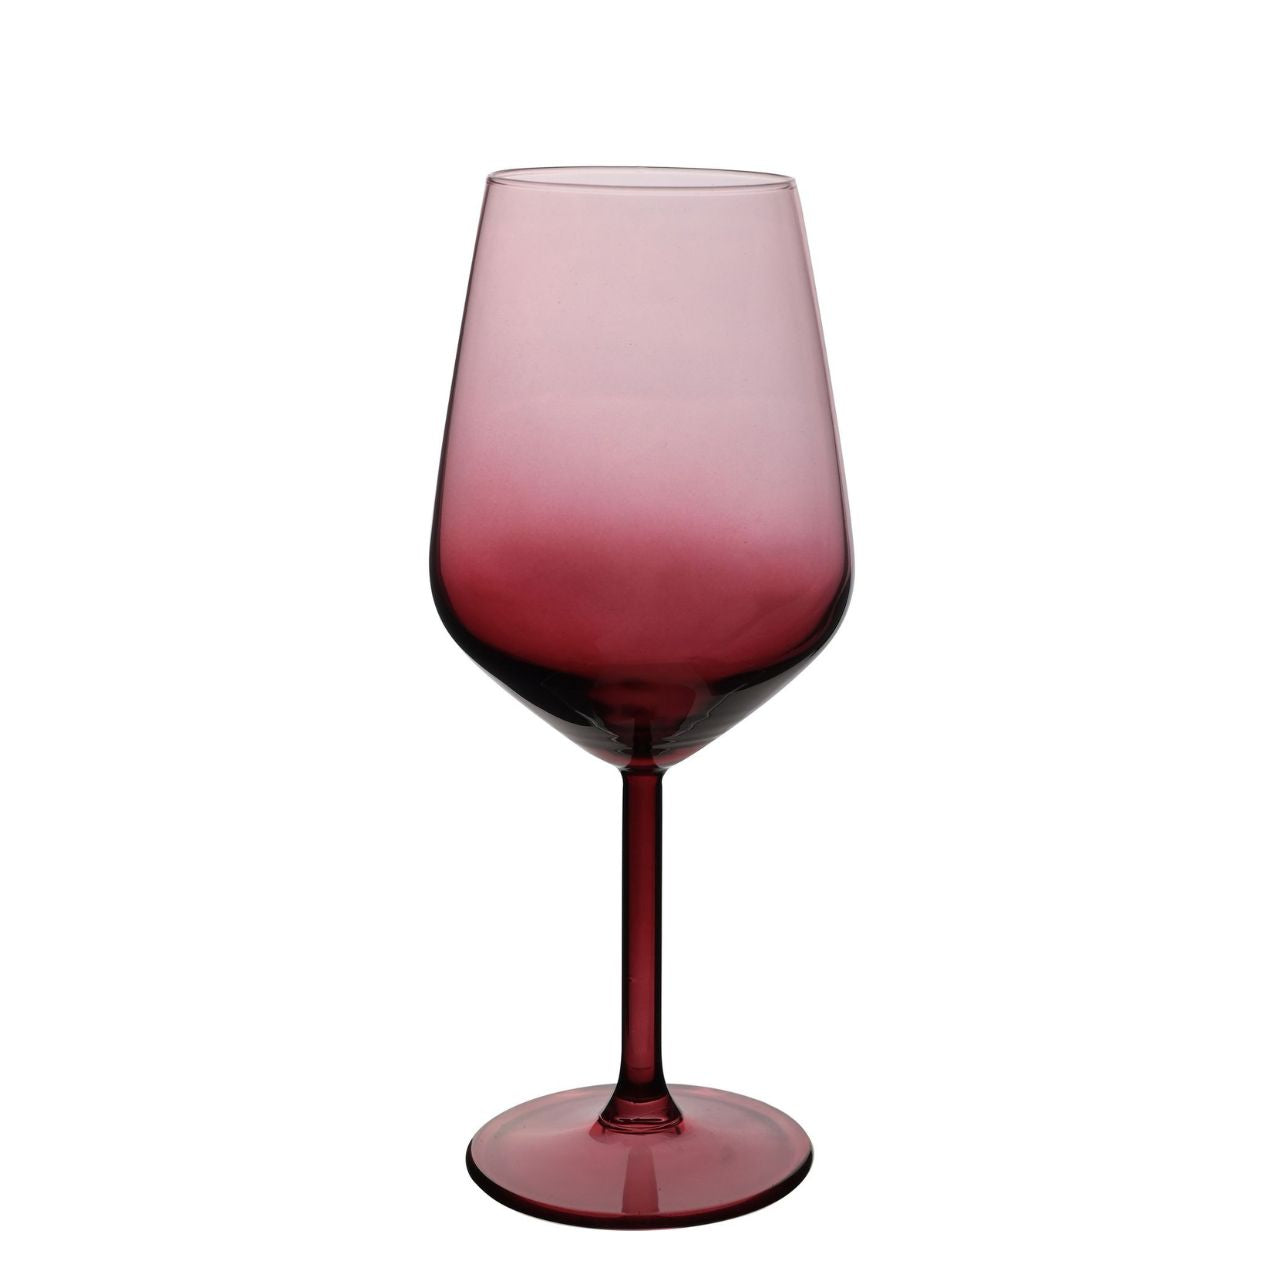 Red Ombre Christmas Wine Glasses  A red ombre wine glass.  This elegant and stylish glassware adds instant modernity to the home.